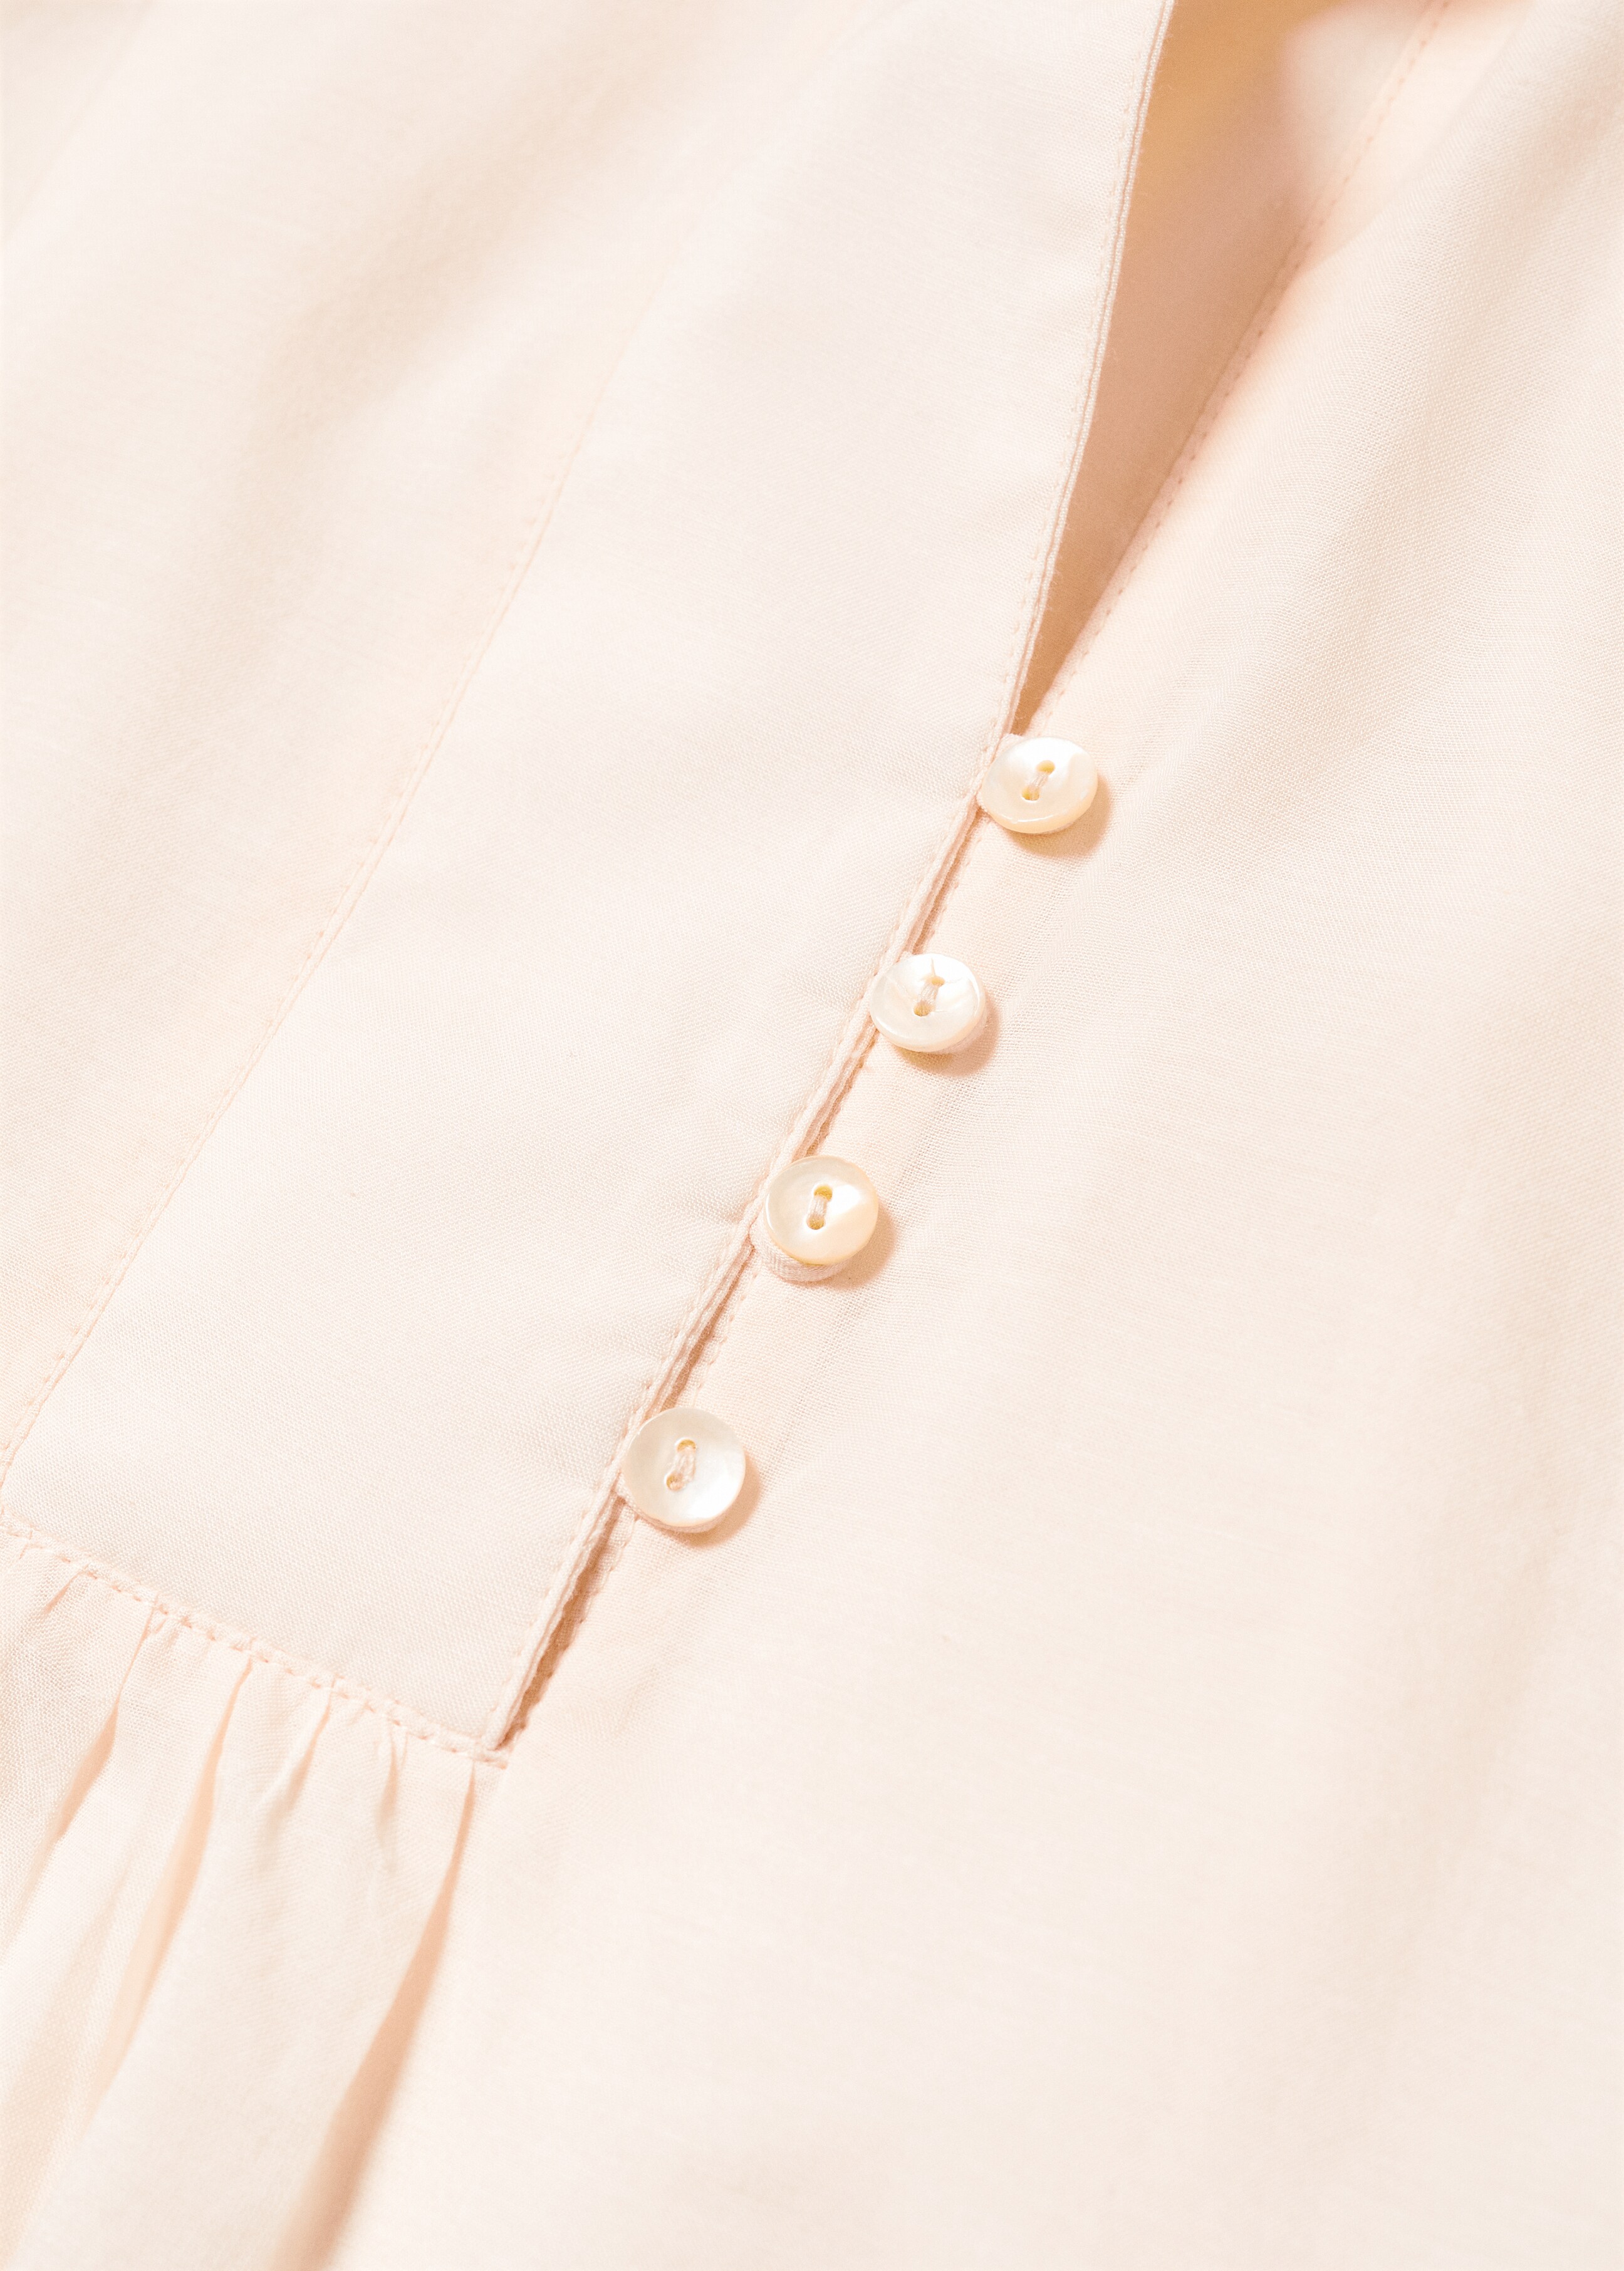 Oversized shirt blouse - Details of the article 8